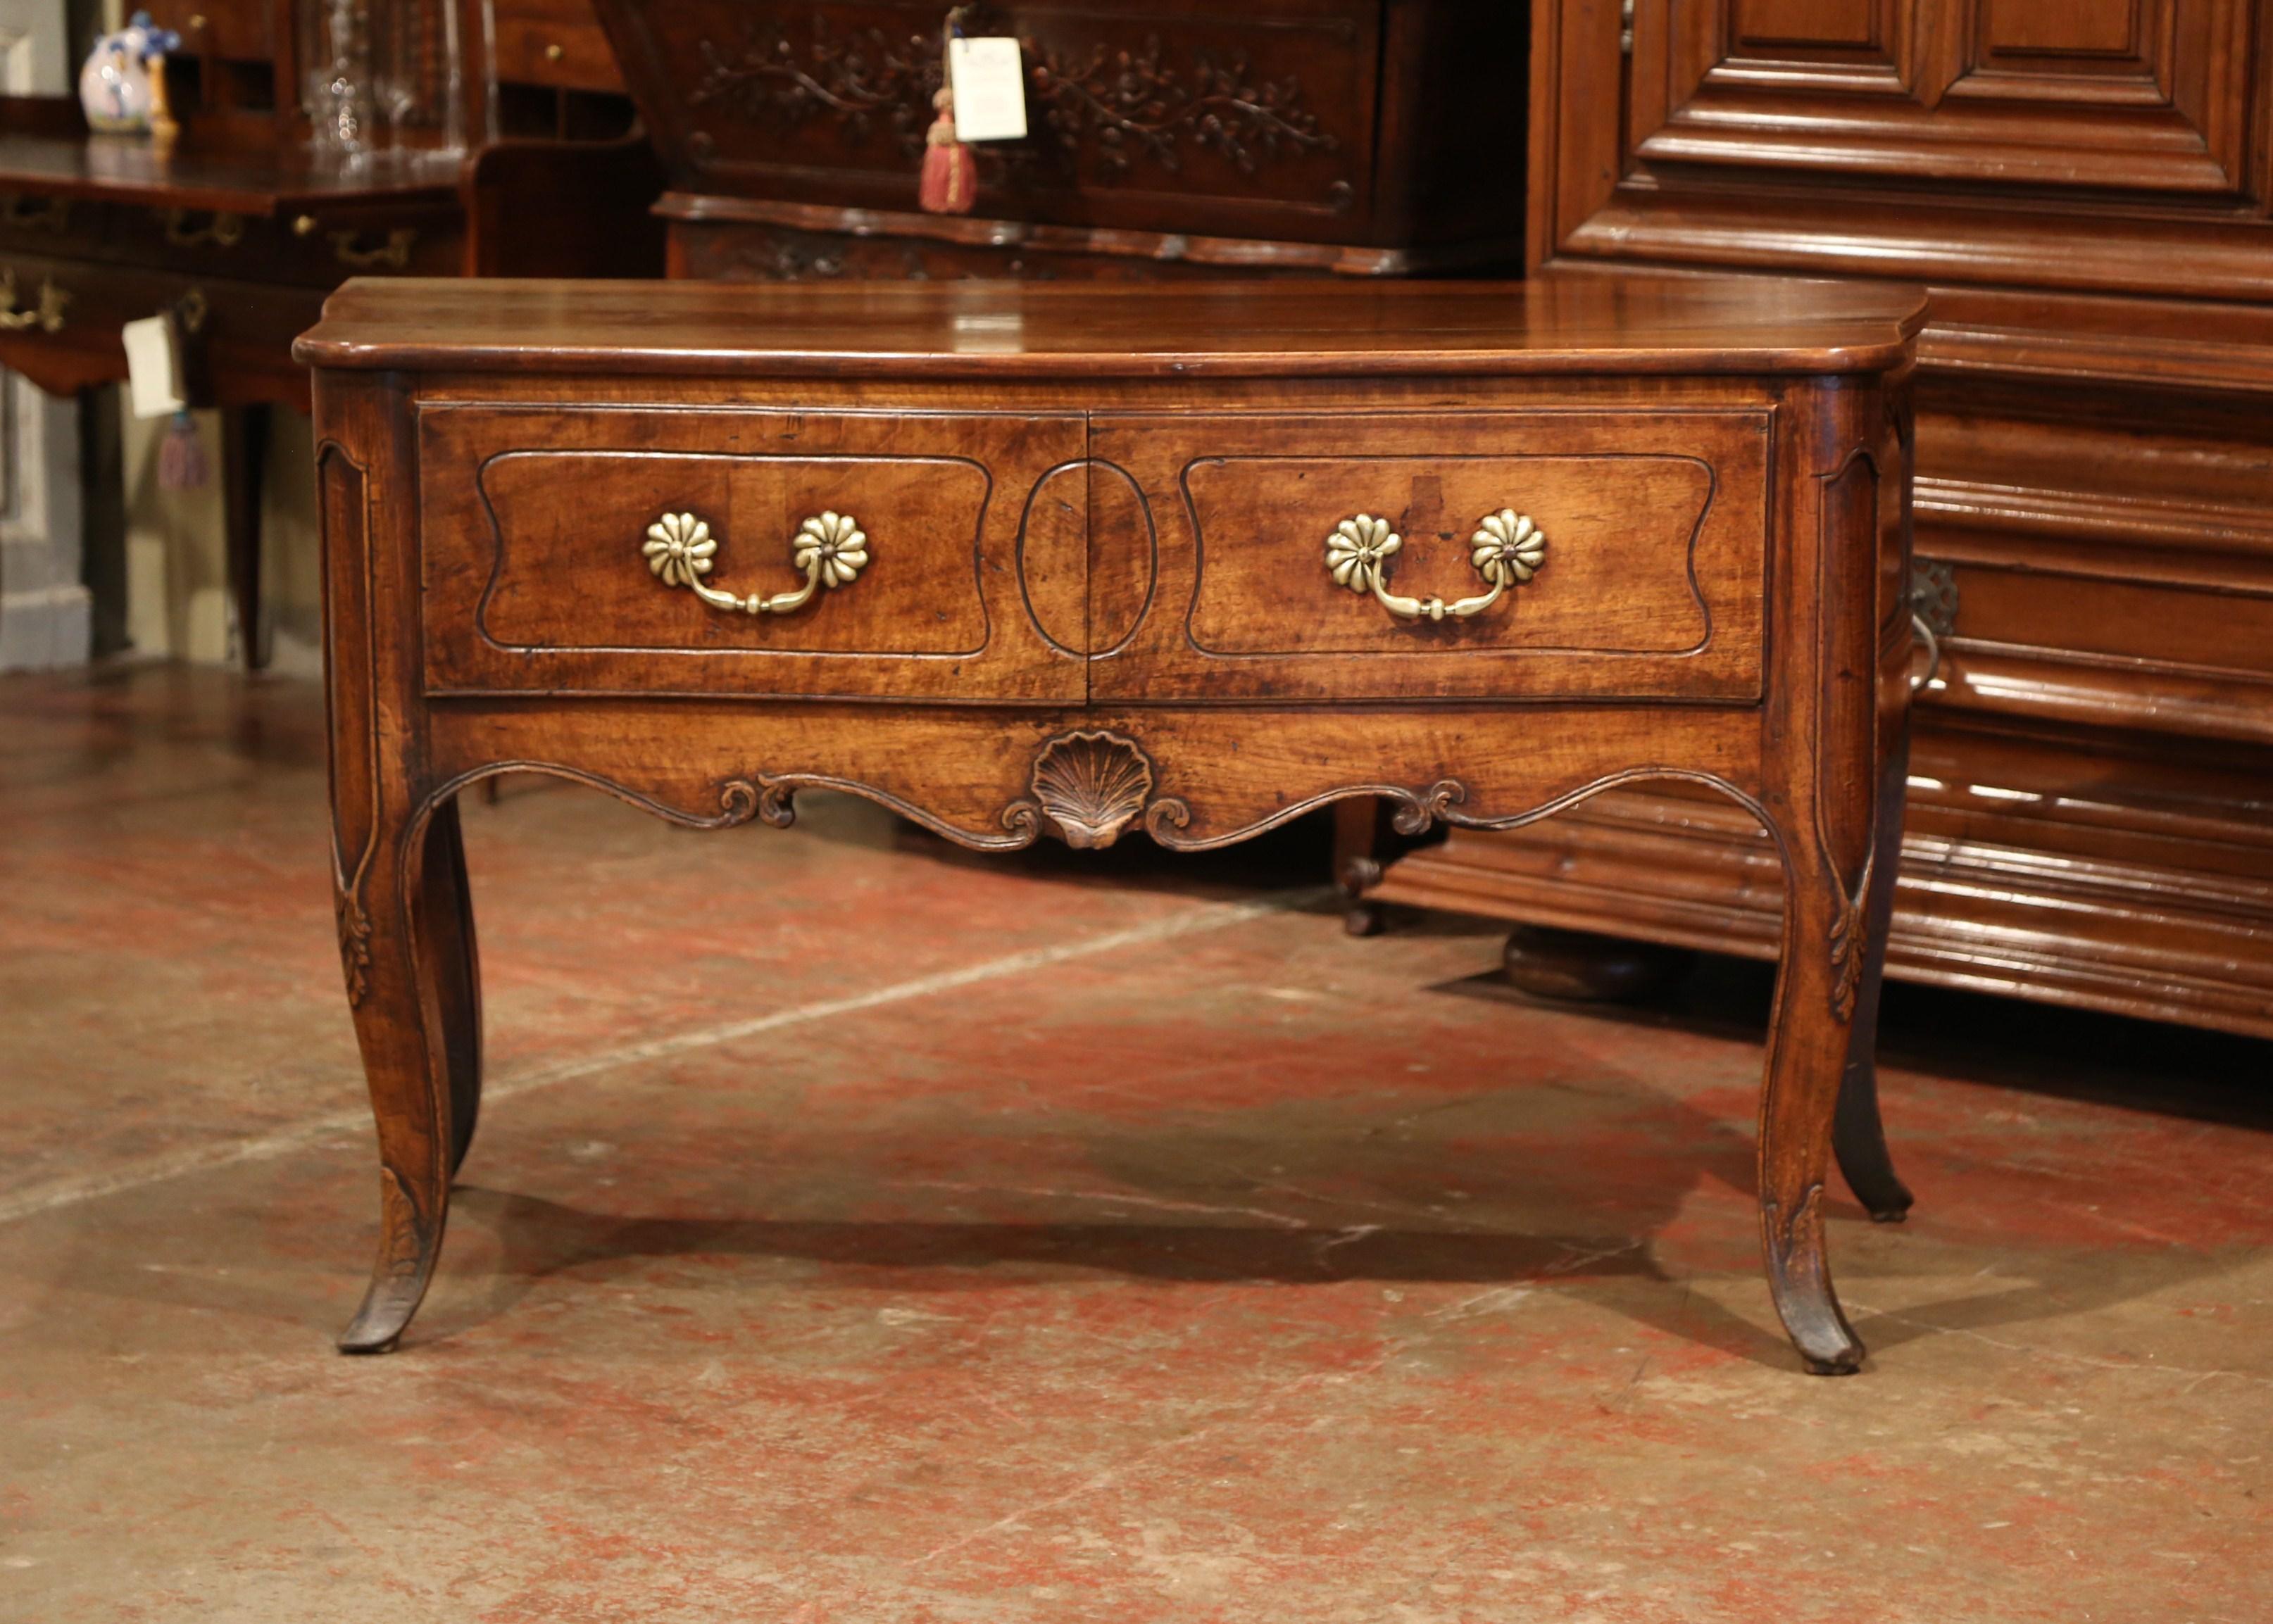 This elegant antique console table with bow front and curved sides was crafted in France, circa 1840. The fruit wood chest stands on four cabriole legs with sabot feet, and decorated at the knees with stylized foliate decor. Ornamented with a Louis